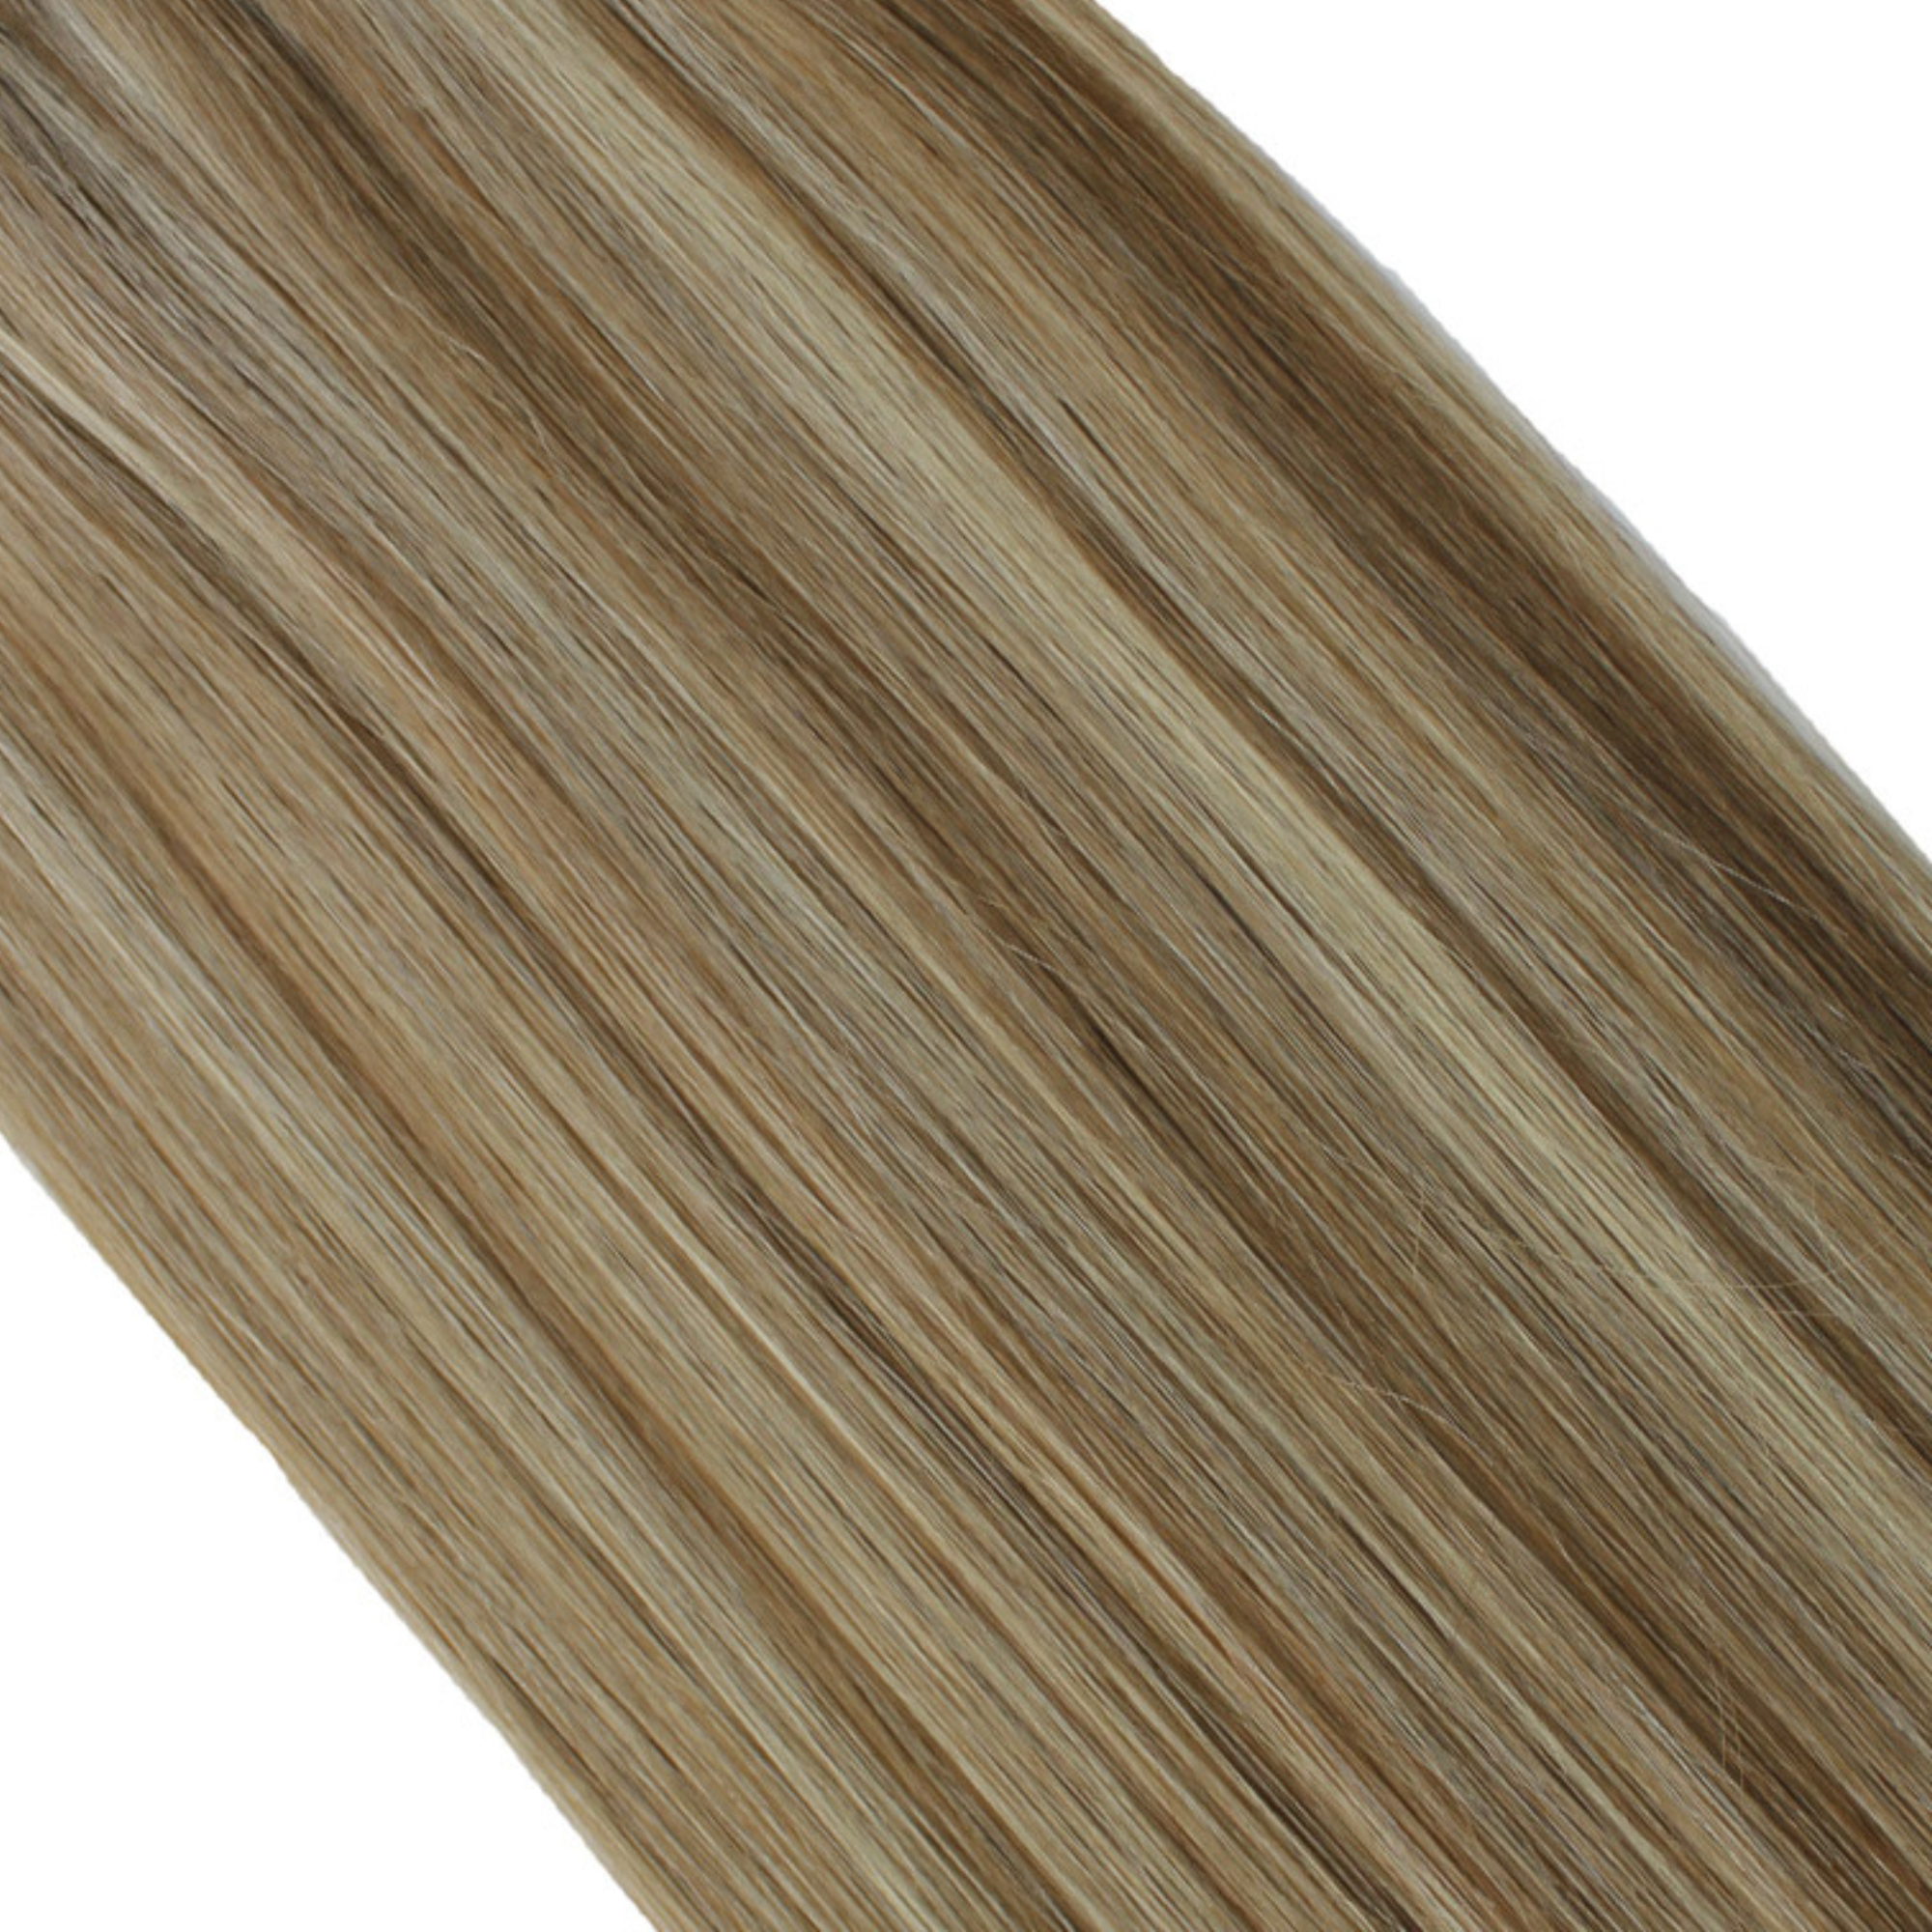 "hair rehab london 18" weft hair extensions shade swatch titled supermodel style"